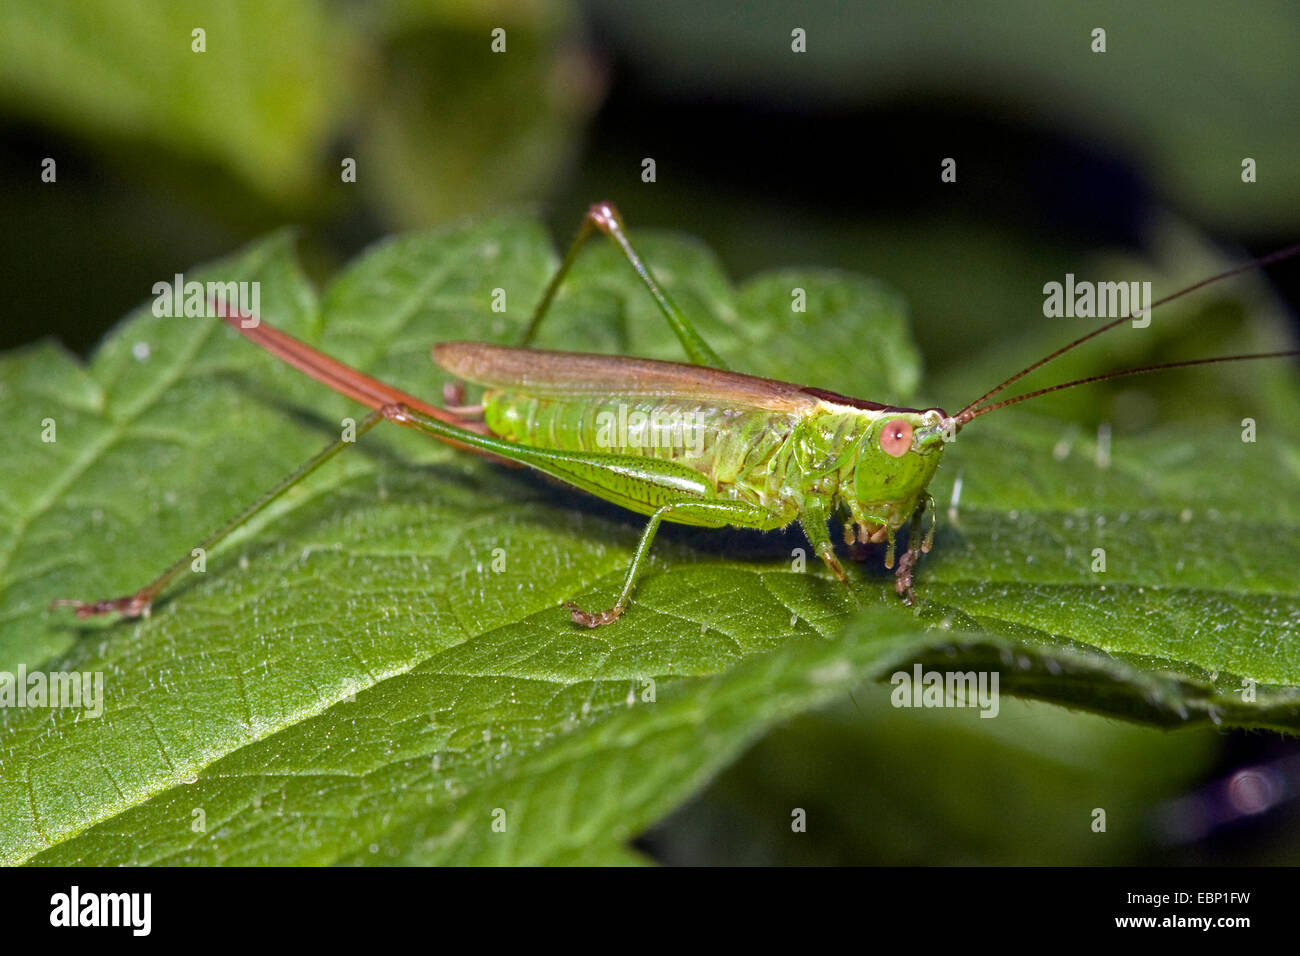 long-winged cone-head, long-winged conehead (Conocephalus discolor), on a leaf, Germany Stock Photo